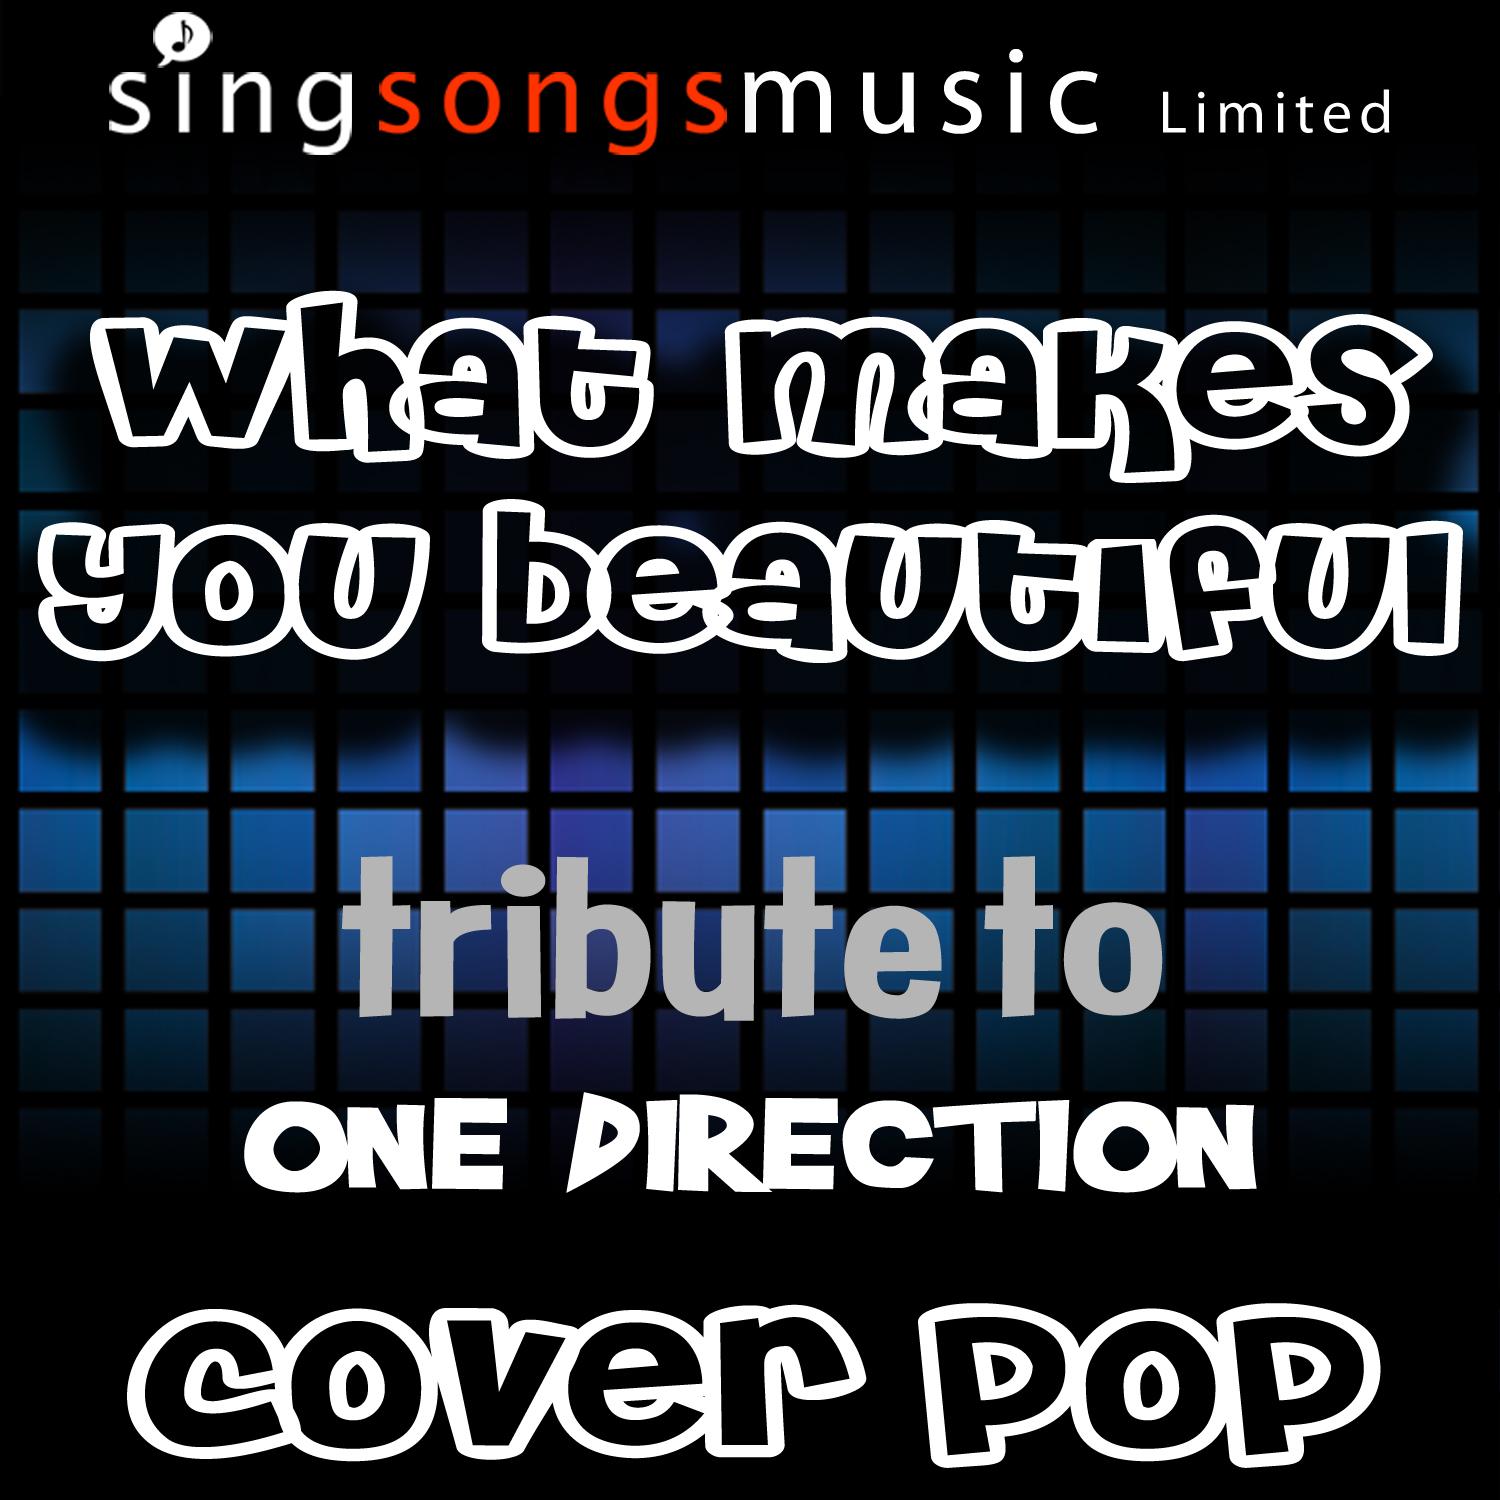 What Makes You Beautiful (A Tribute to One Direction)